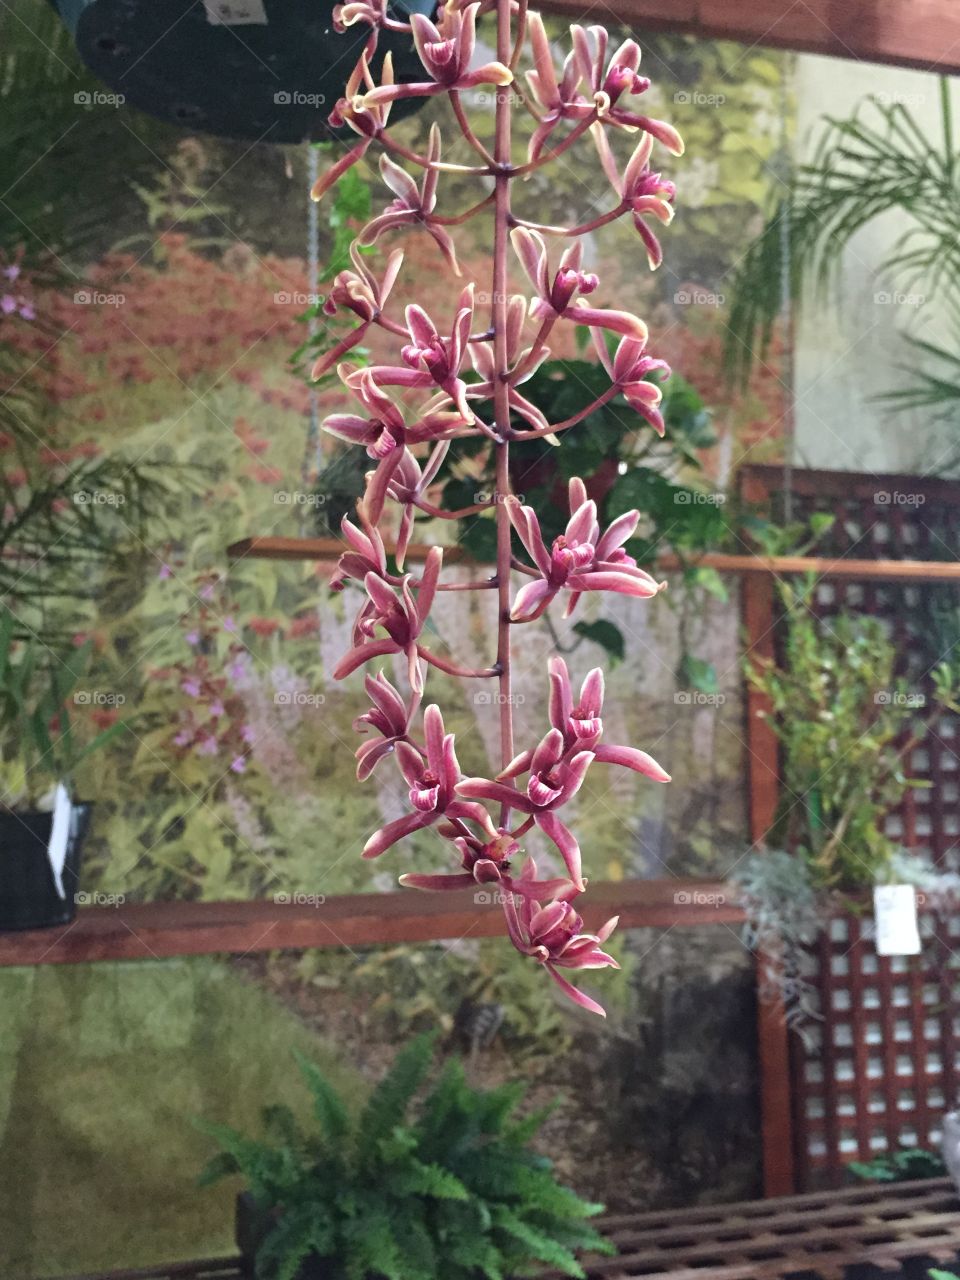 Hanging orchid. Flower show. Hanging orchid.